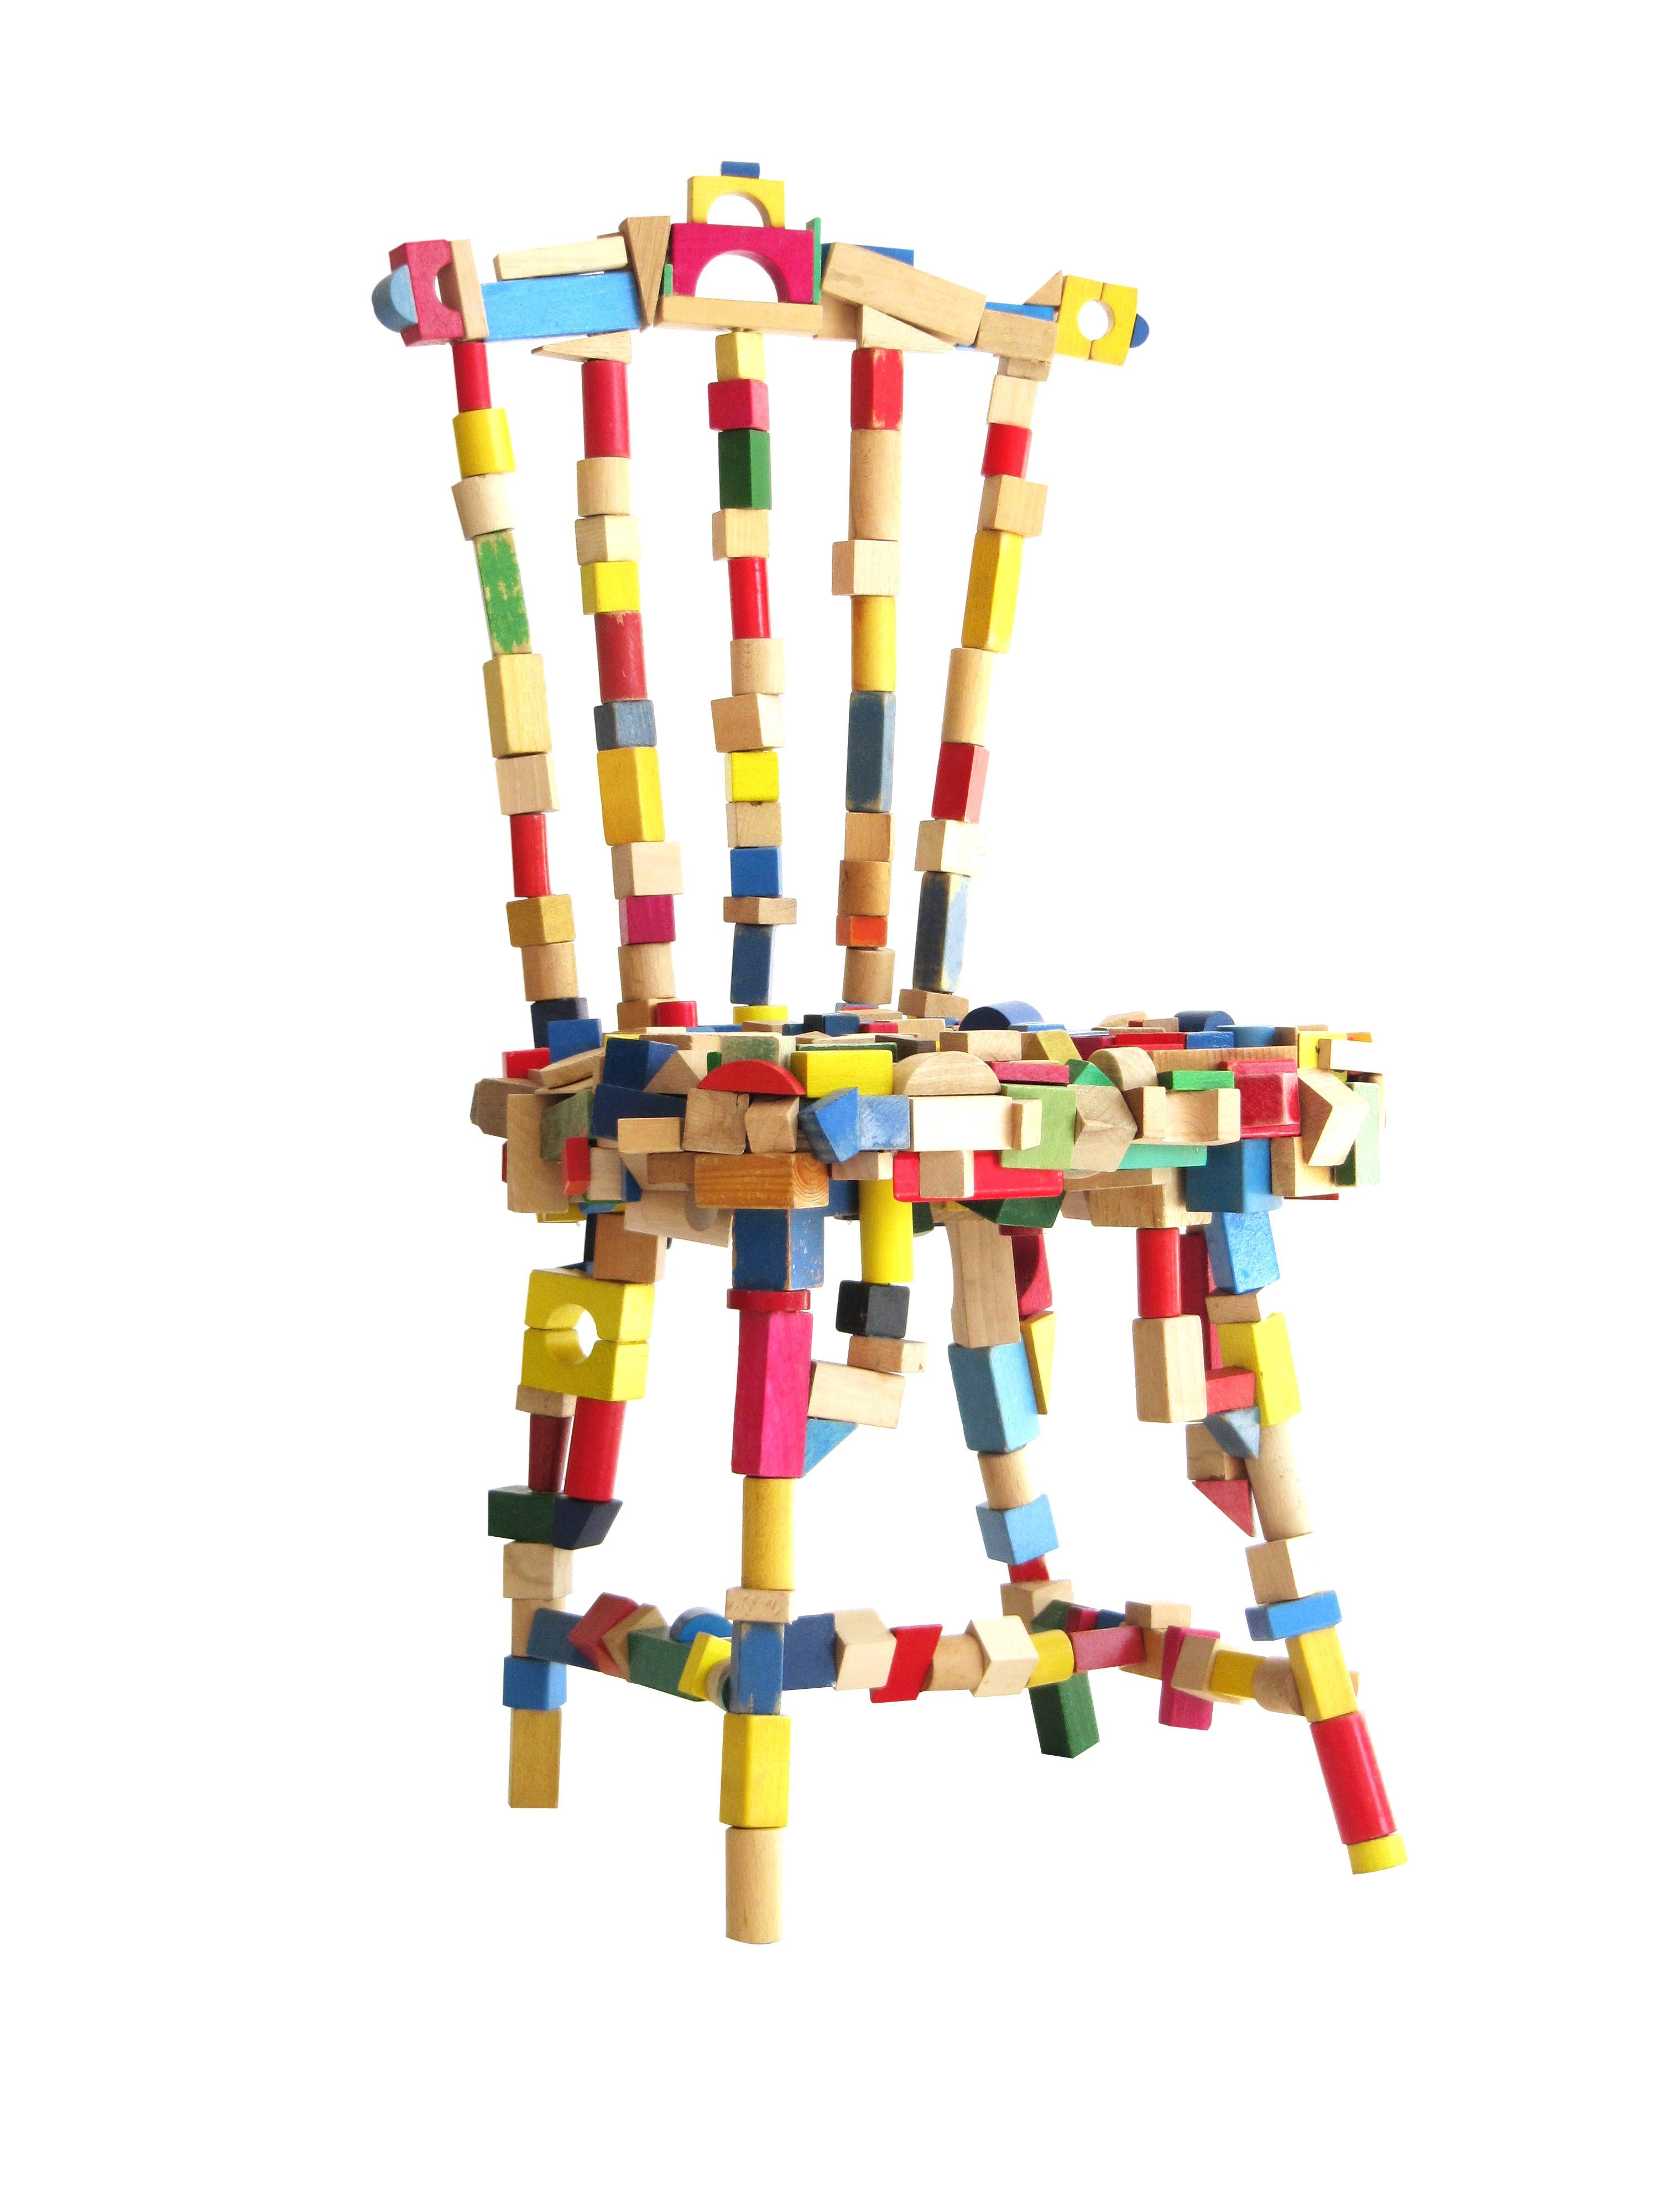 This chair and chandelier that look like a child had dreamt them up, are playful iterations of the most humble and the most grandiose pieces of furniture in existence. The toy bricks were collected from various goodwill stores; owing to their steel